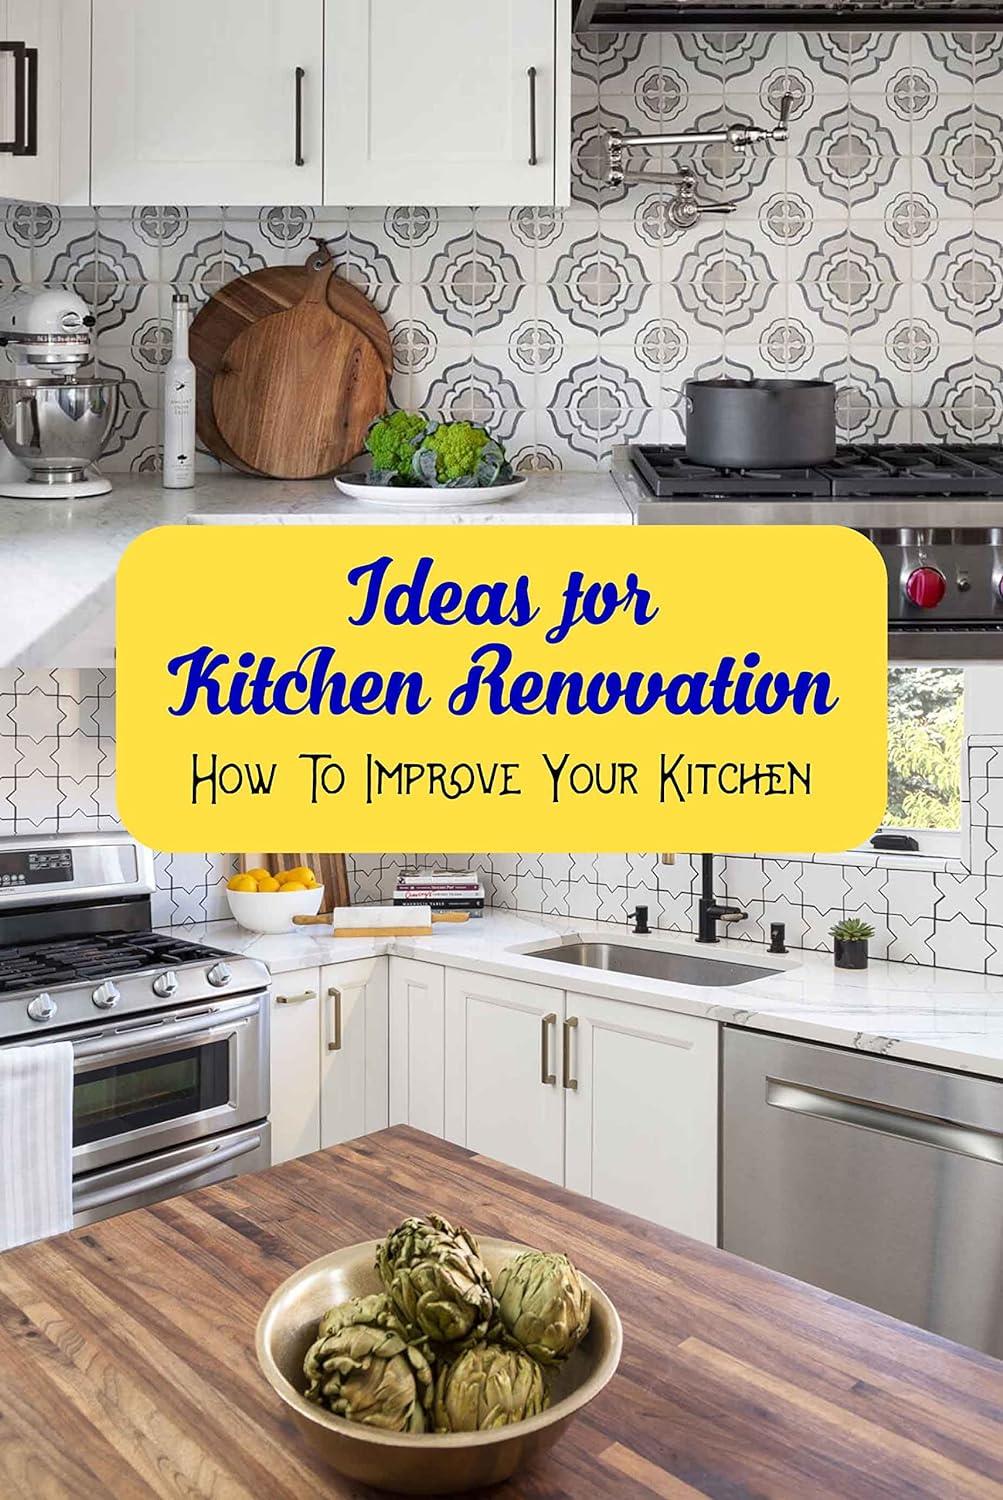 Ideas for Kitchen Renovation: How To Improve Your Kitchen: Tips For Improving Your Kitchen